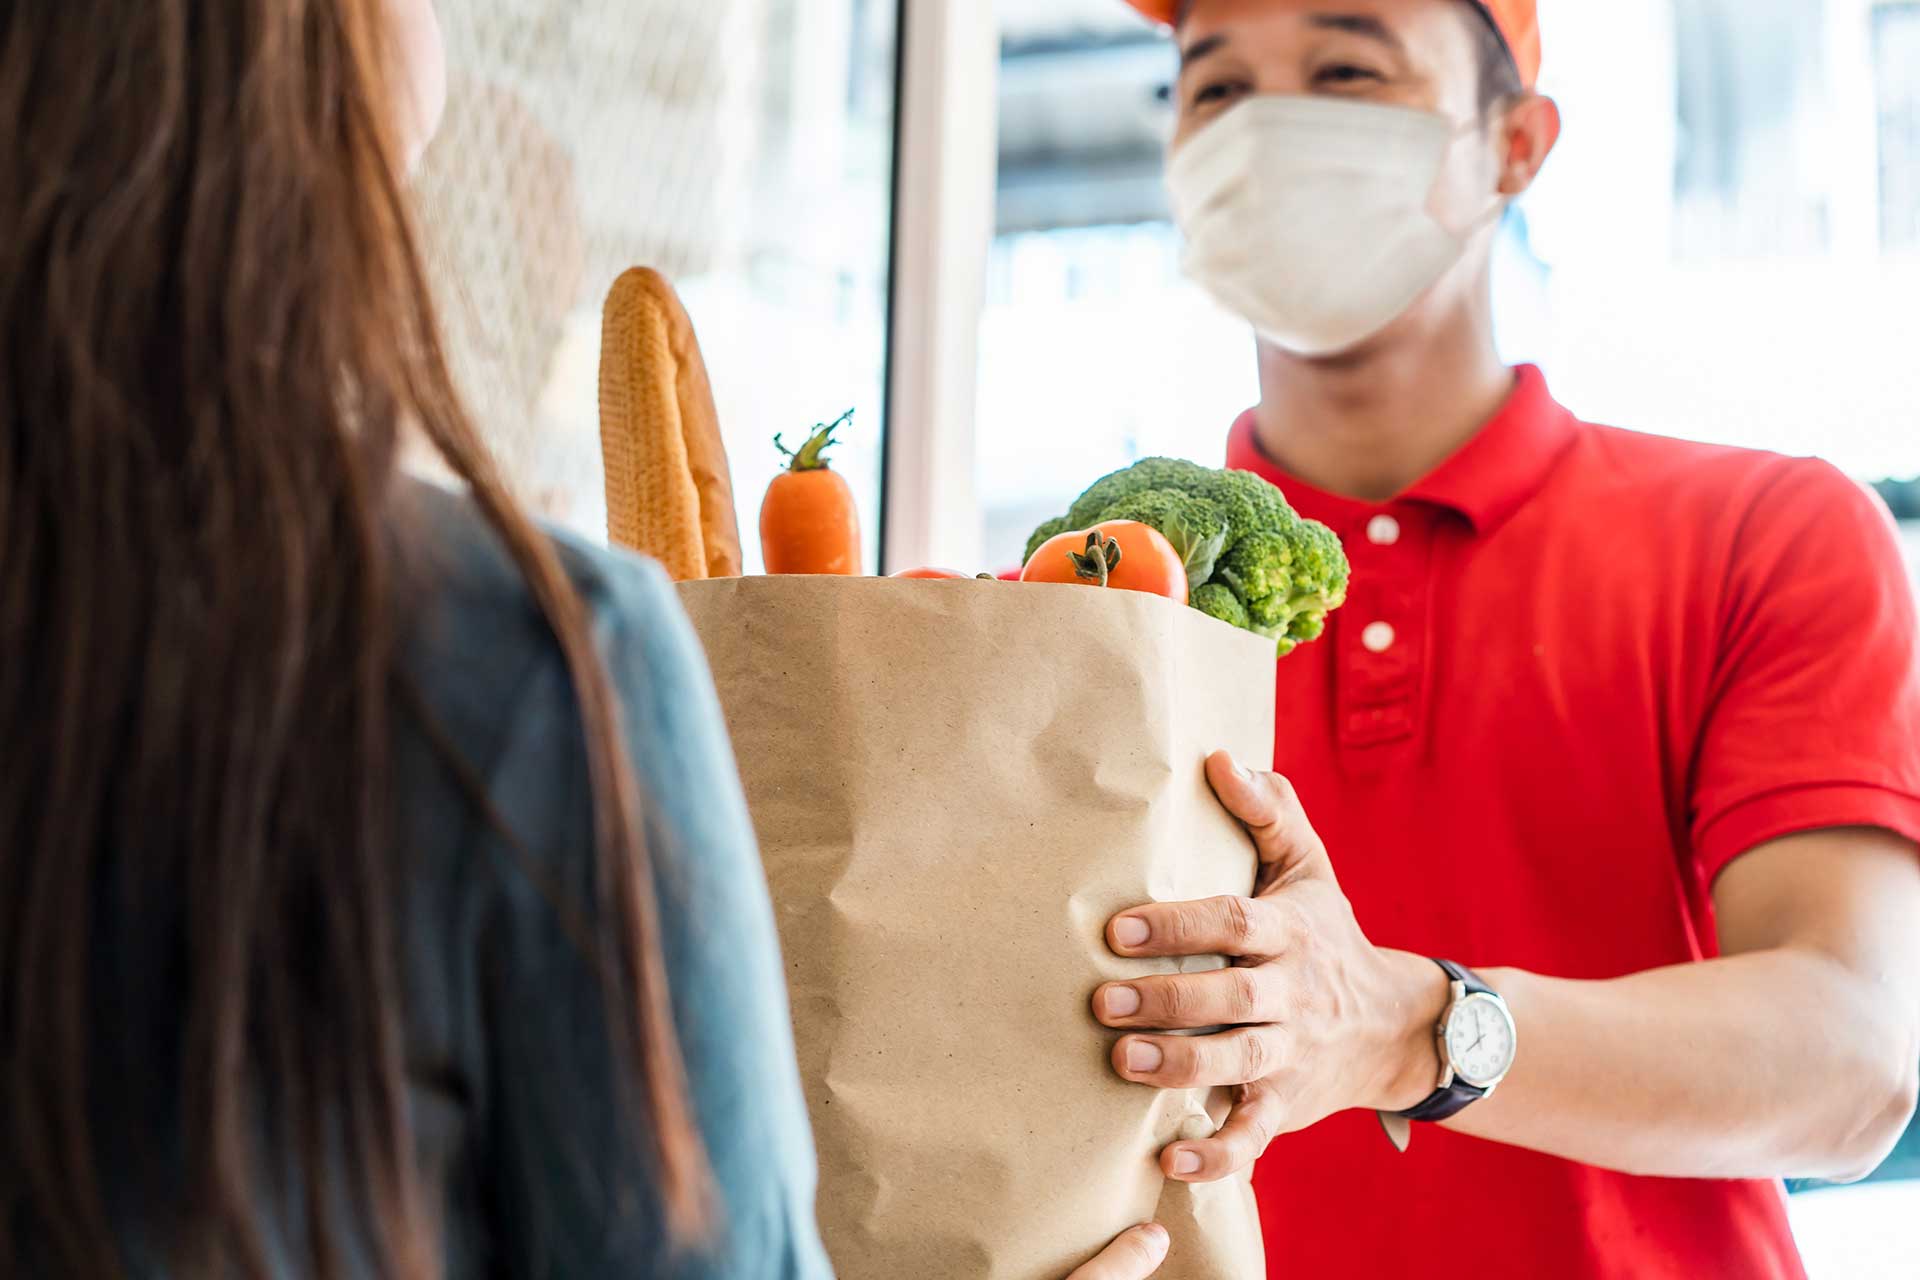 Delivery man wearing face mask in red uniform handling bag of food, fruits, vegetables to female costumer in front of the house.